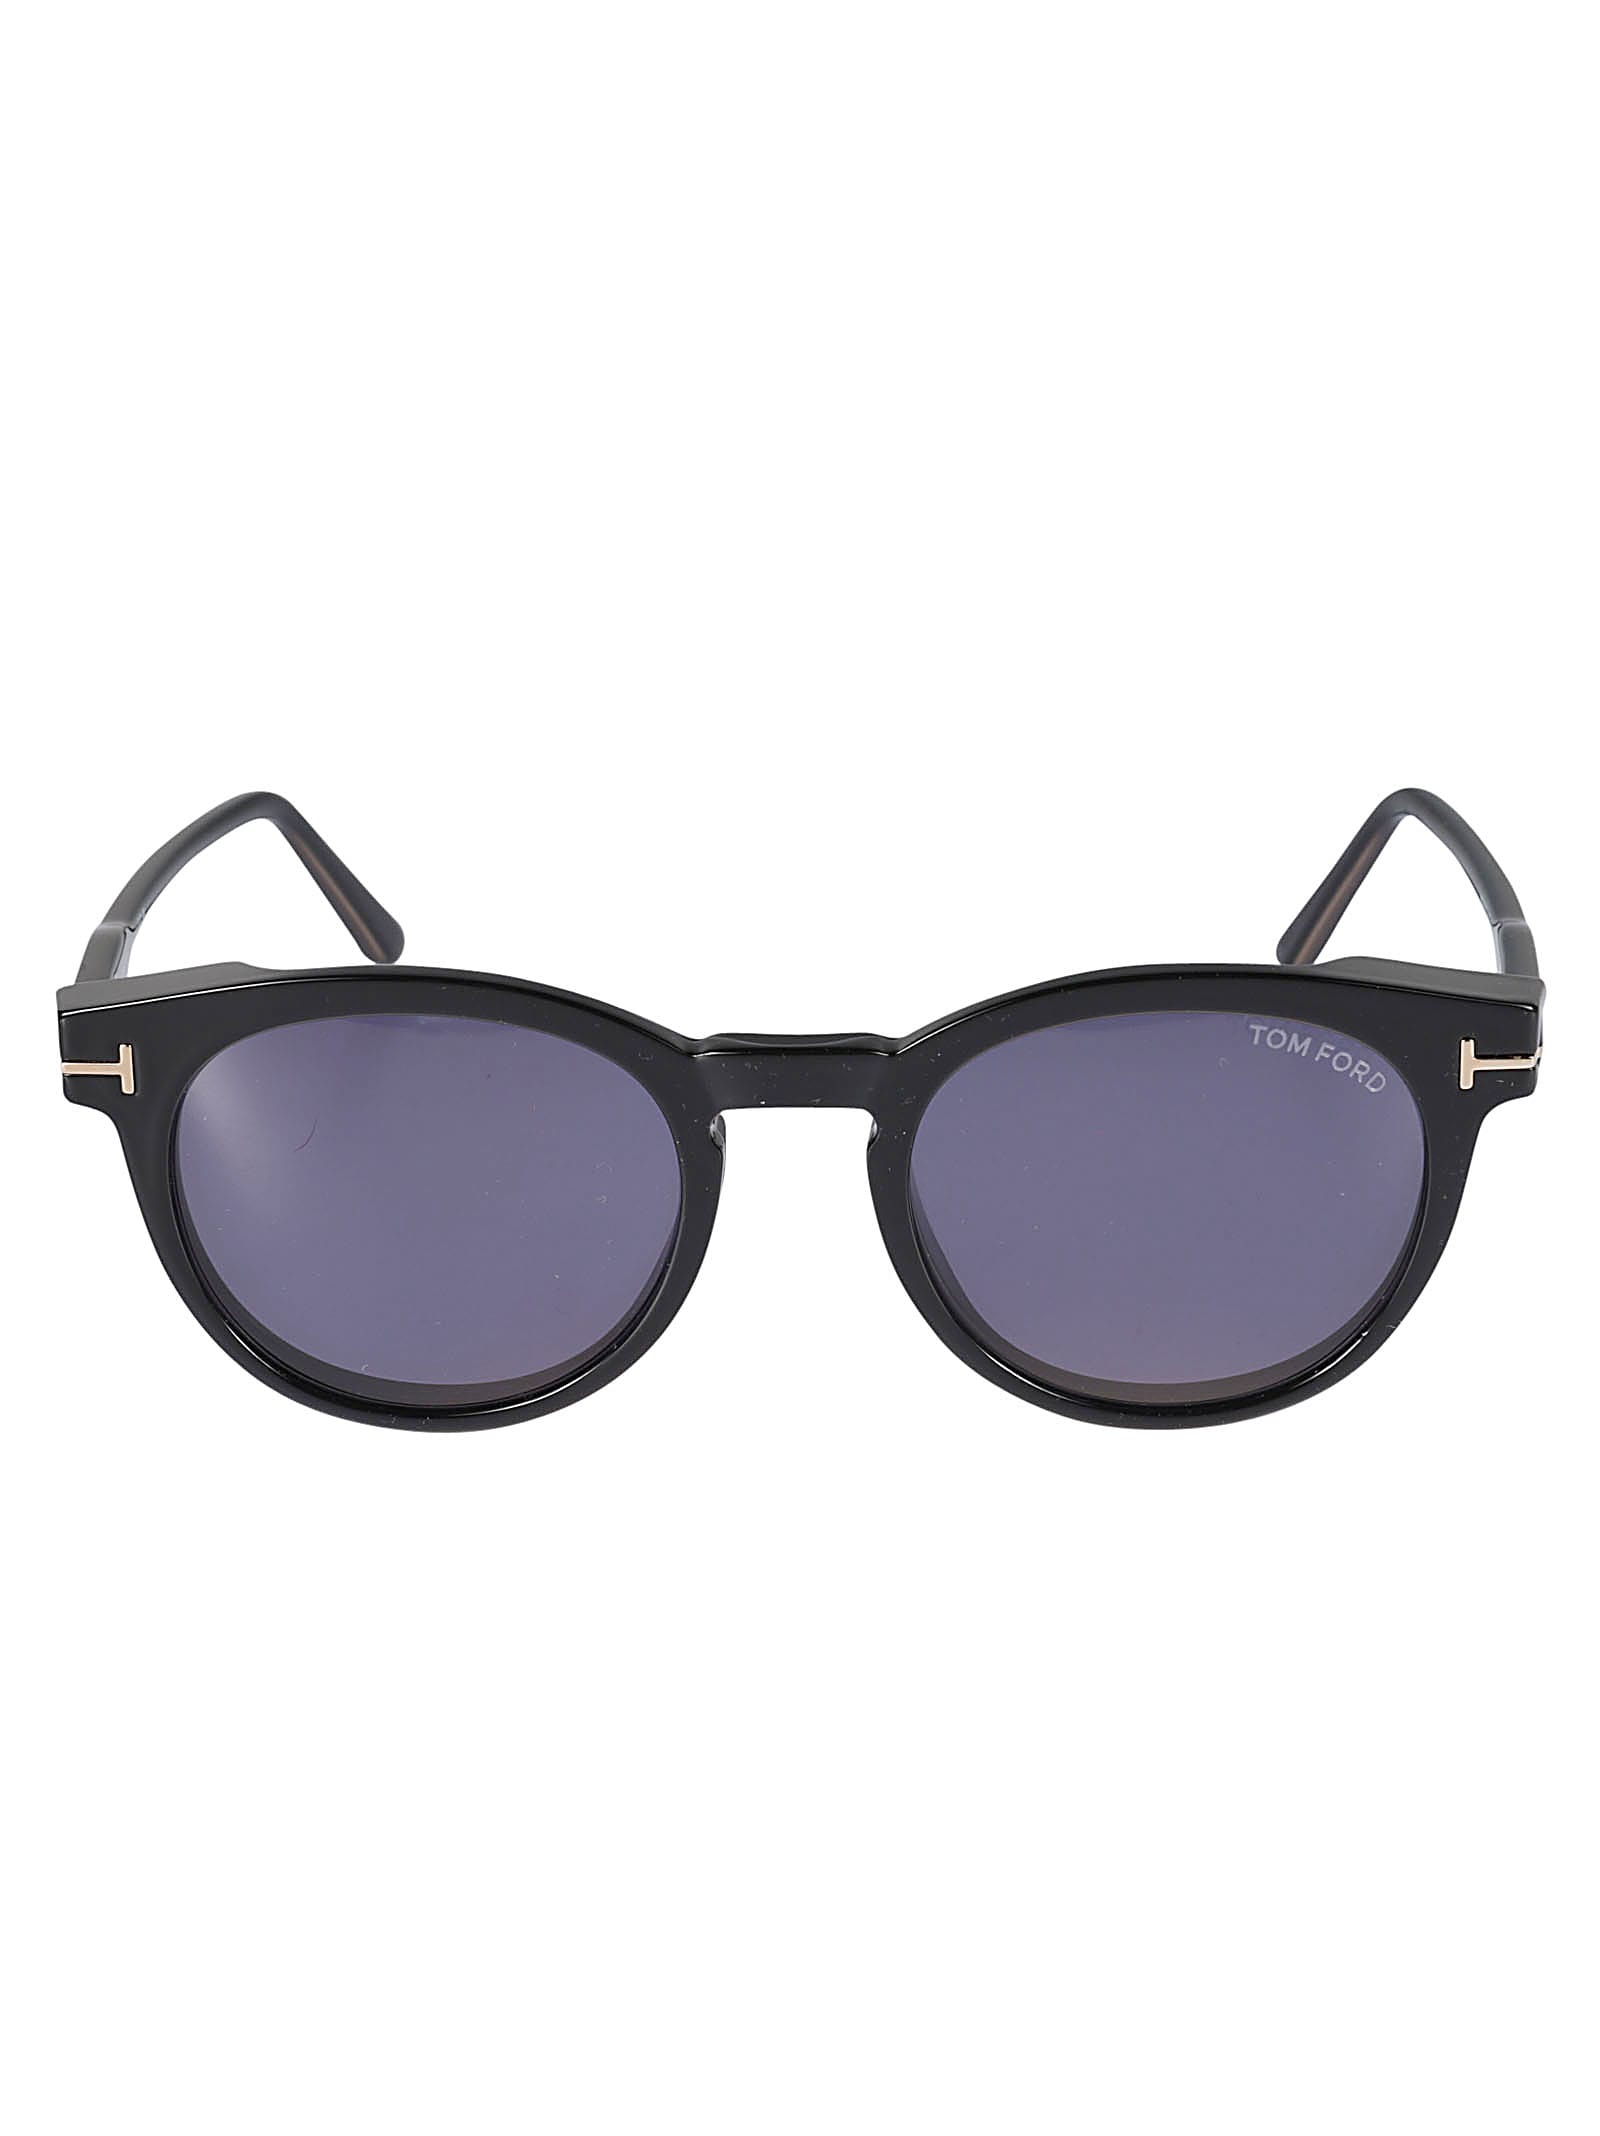 Tom Ford Classic Round Lens Sunglasses In 001